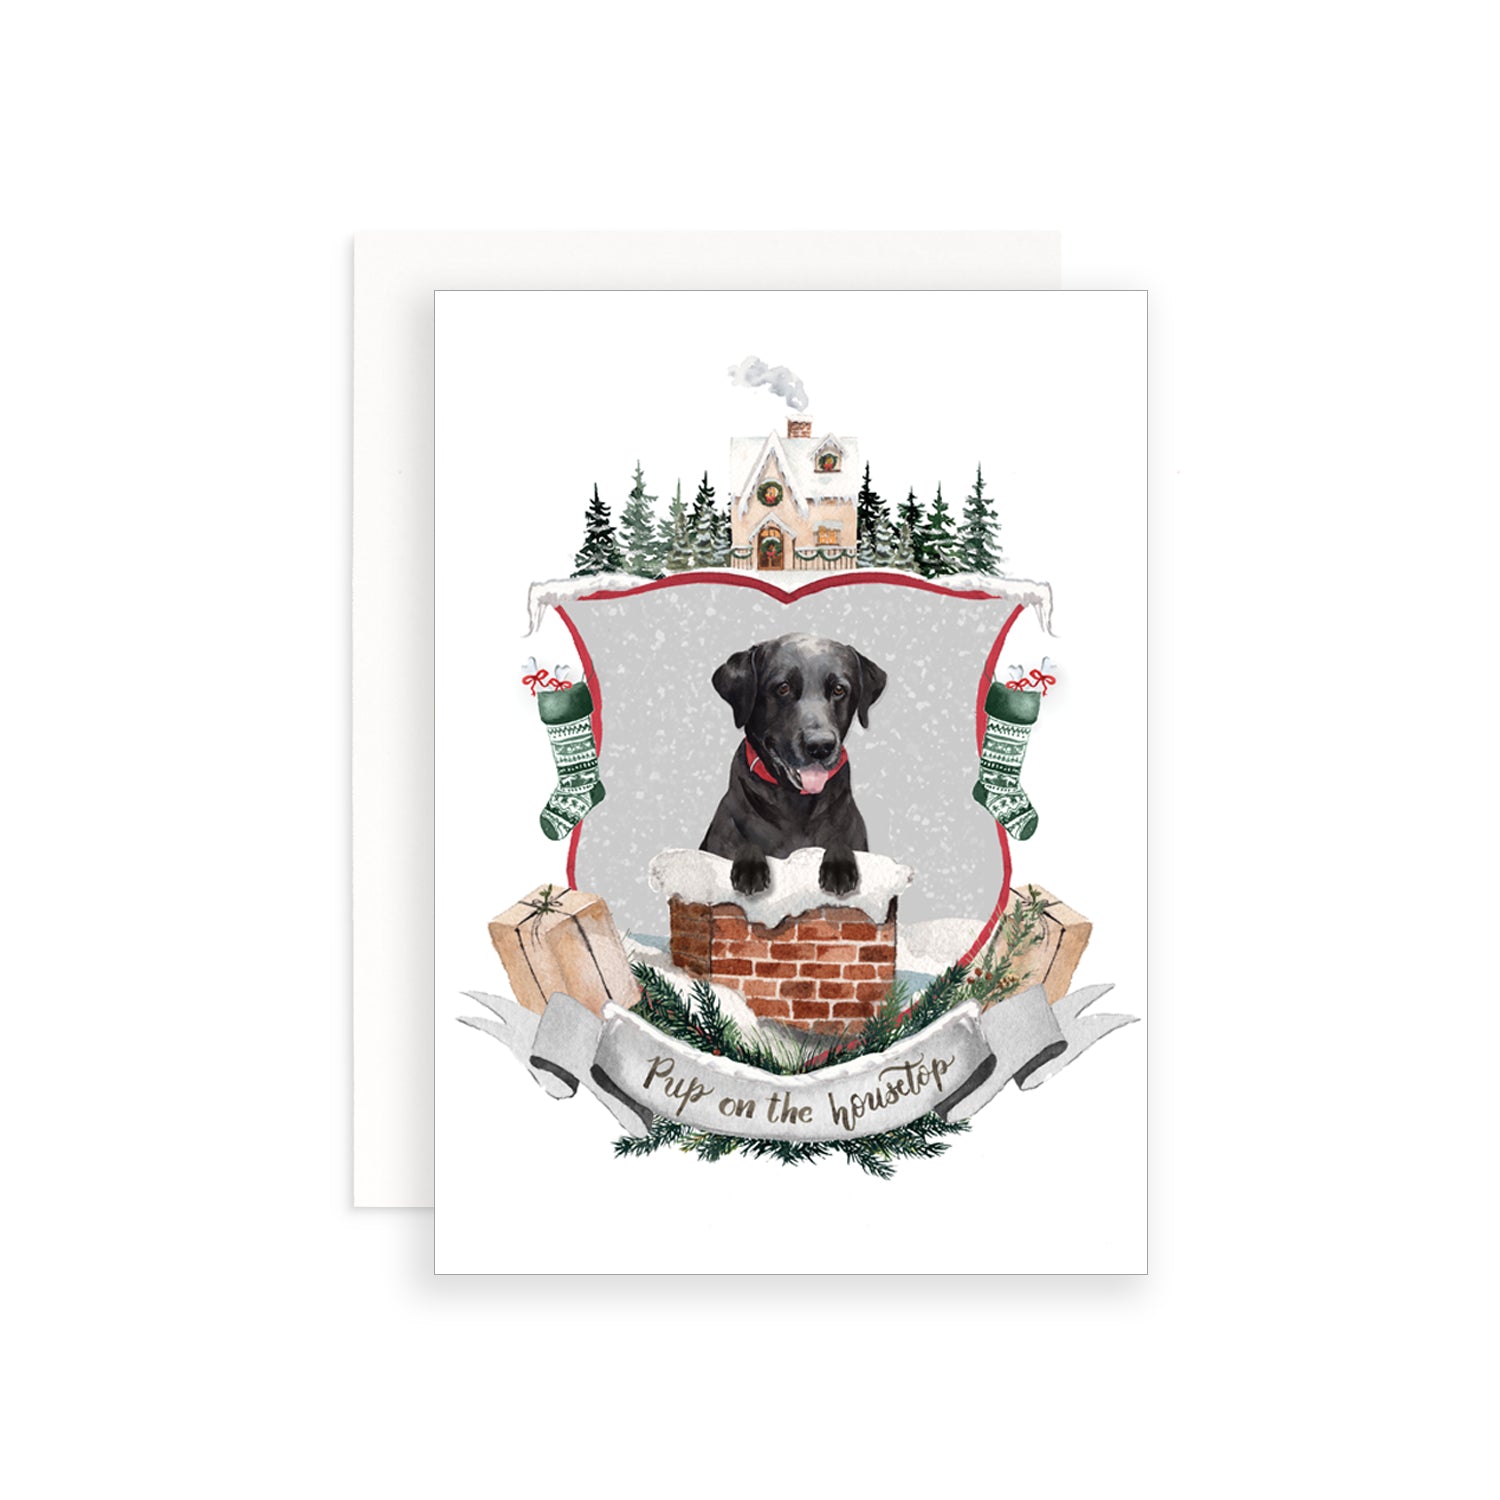 Pup on the Housetop Greeting Card